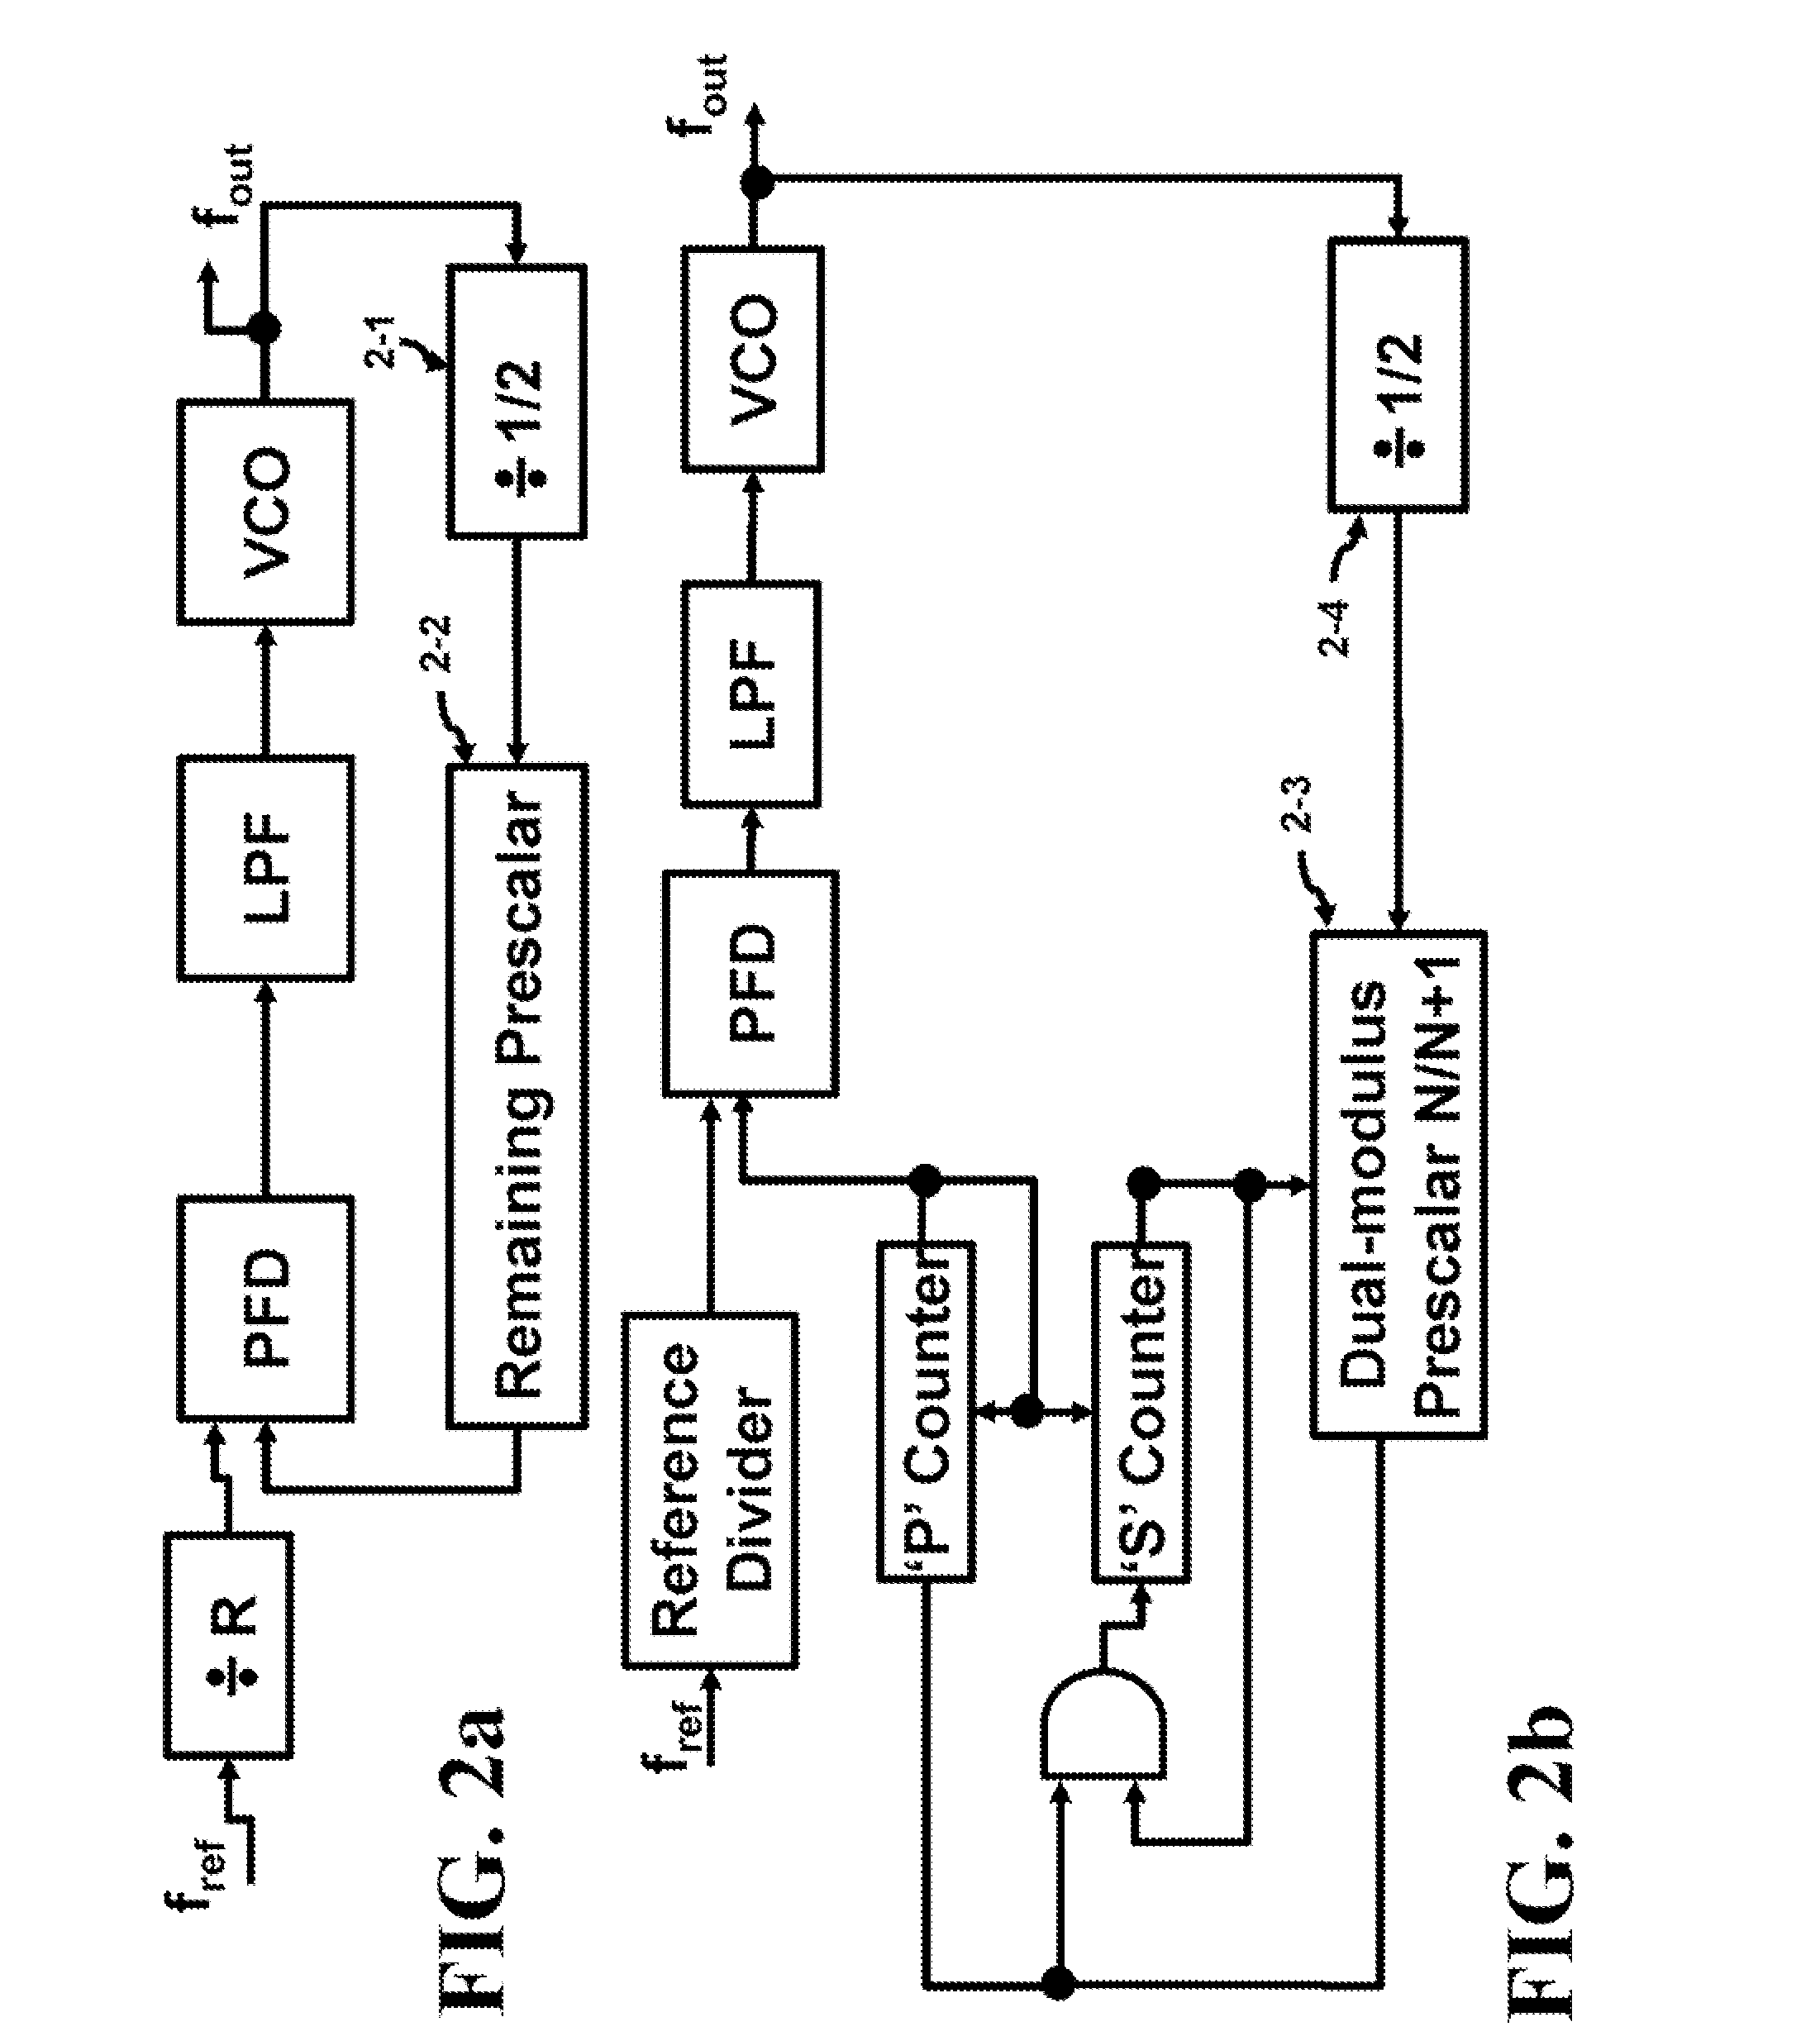 High Performance Divider Using Feed Forward, Clock Amplification and Series Peaking Inductors